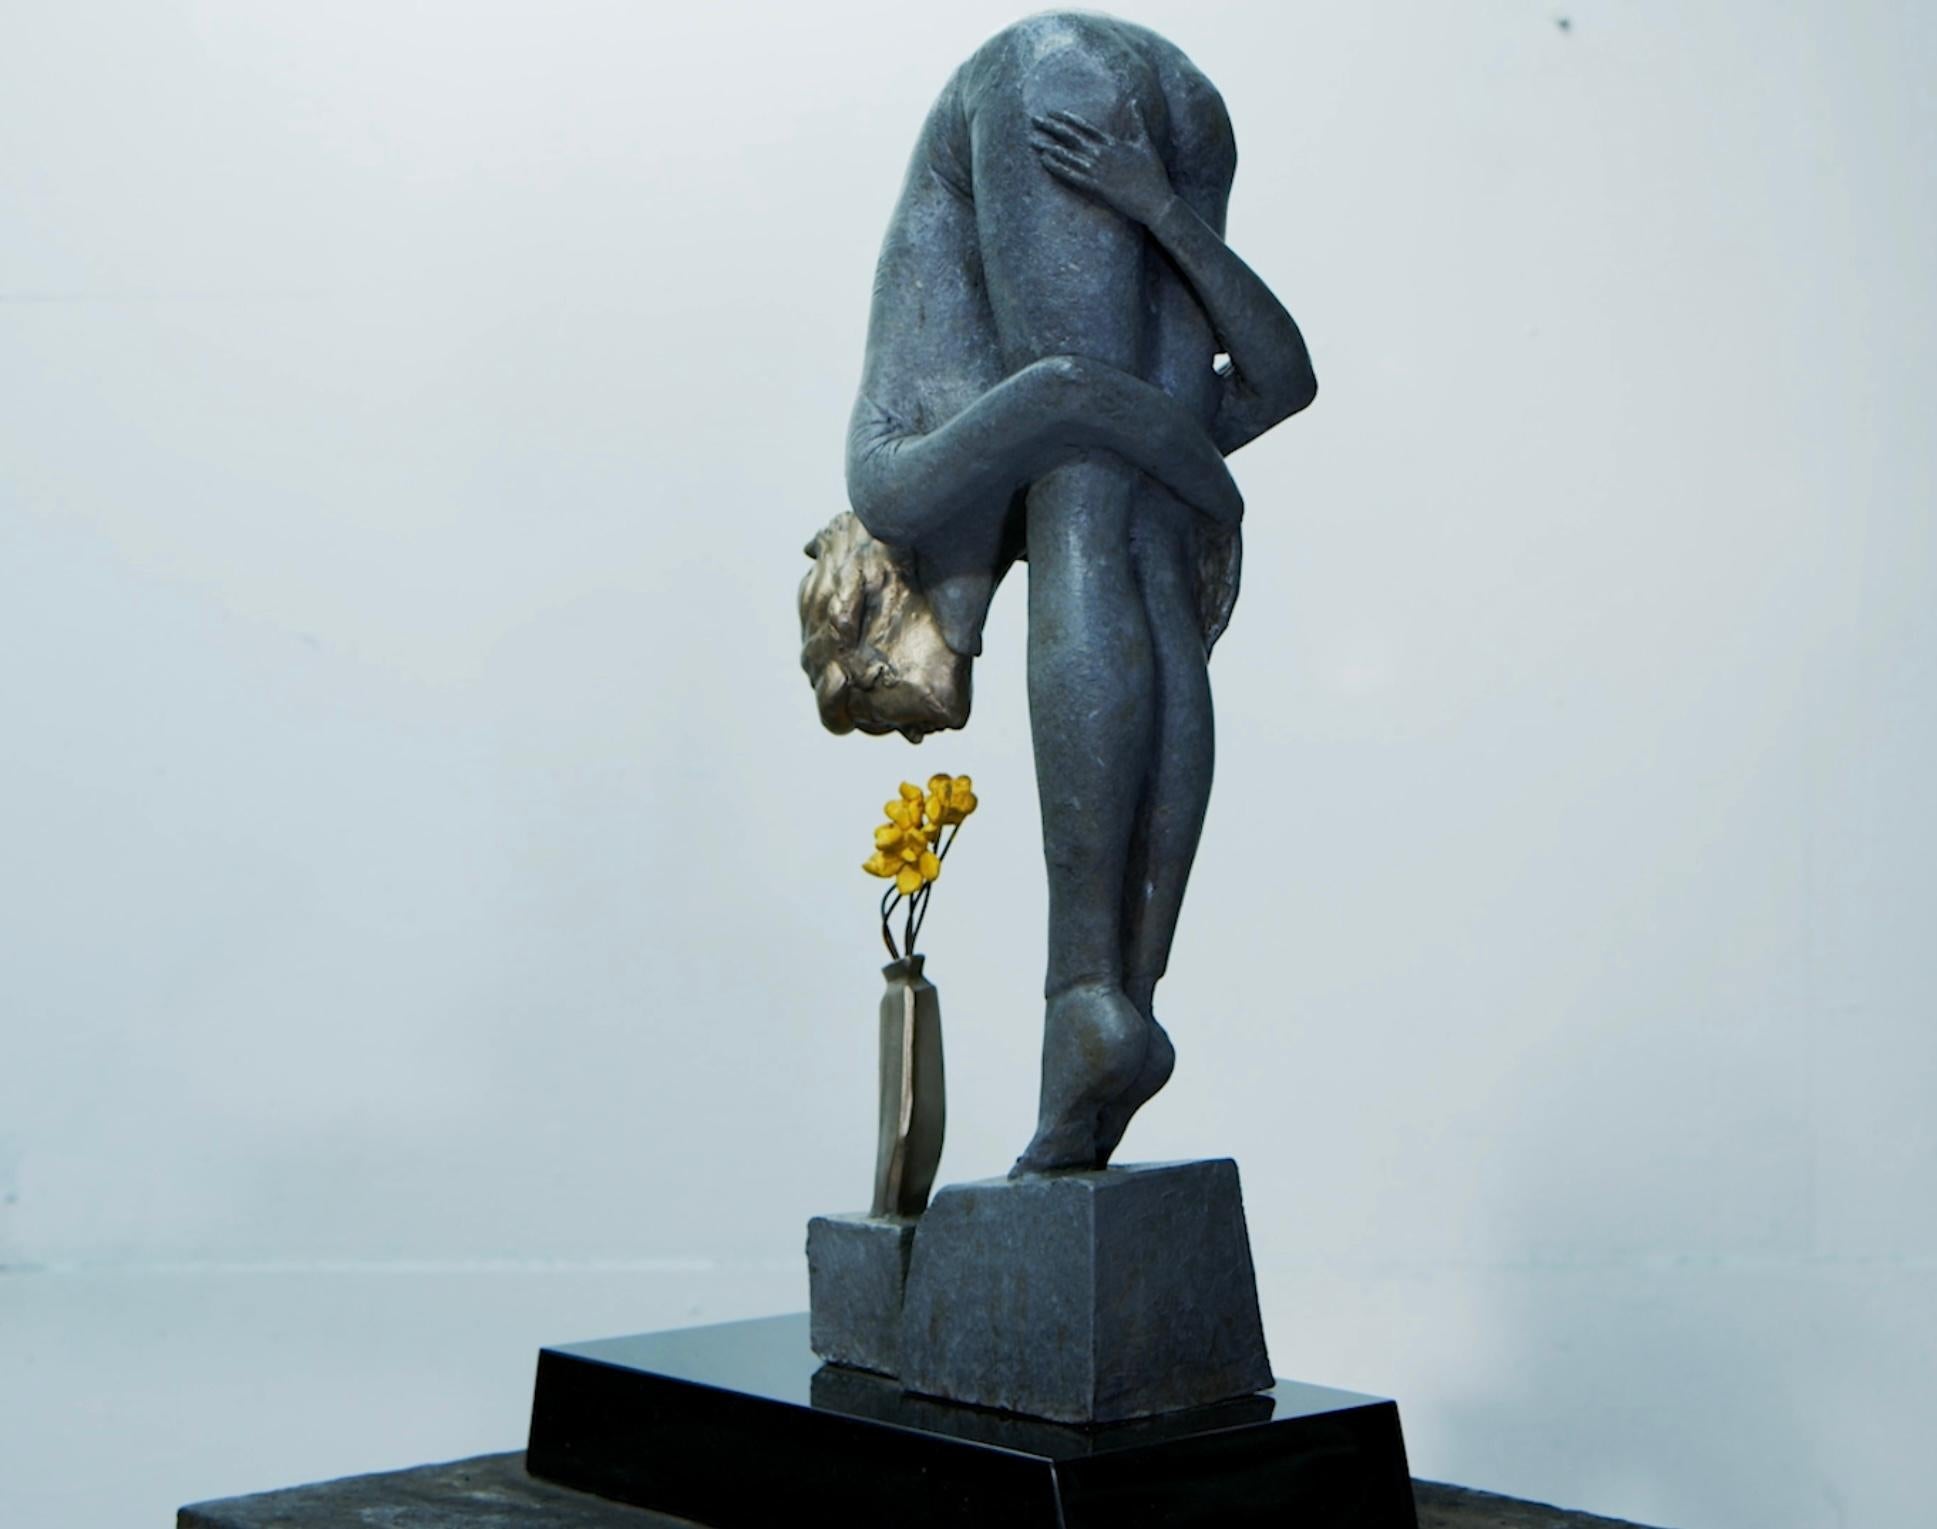 A bronze sculpture that depicts a girl sitting with her arms resting on her legs. The sculpture has a conceptual and figurative style, which means that it represents a real-life subject but also incorporates abstract or symbolic elements.

Artist